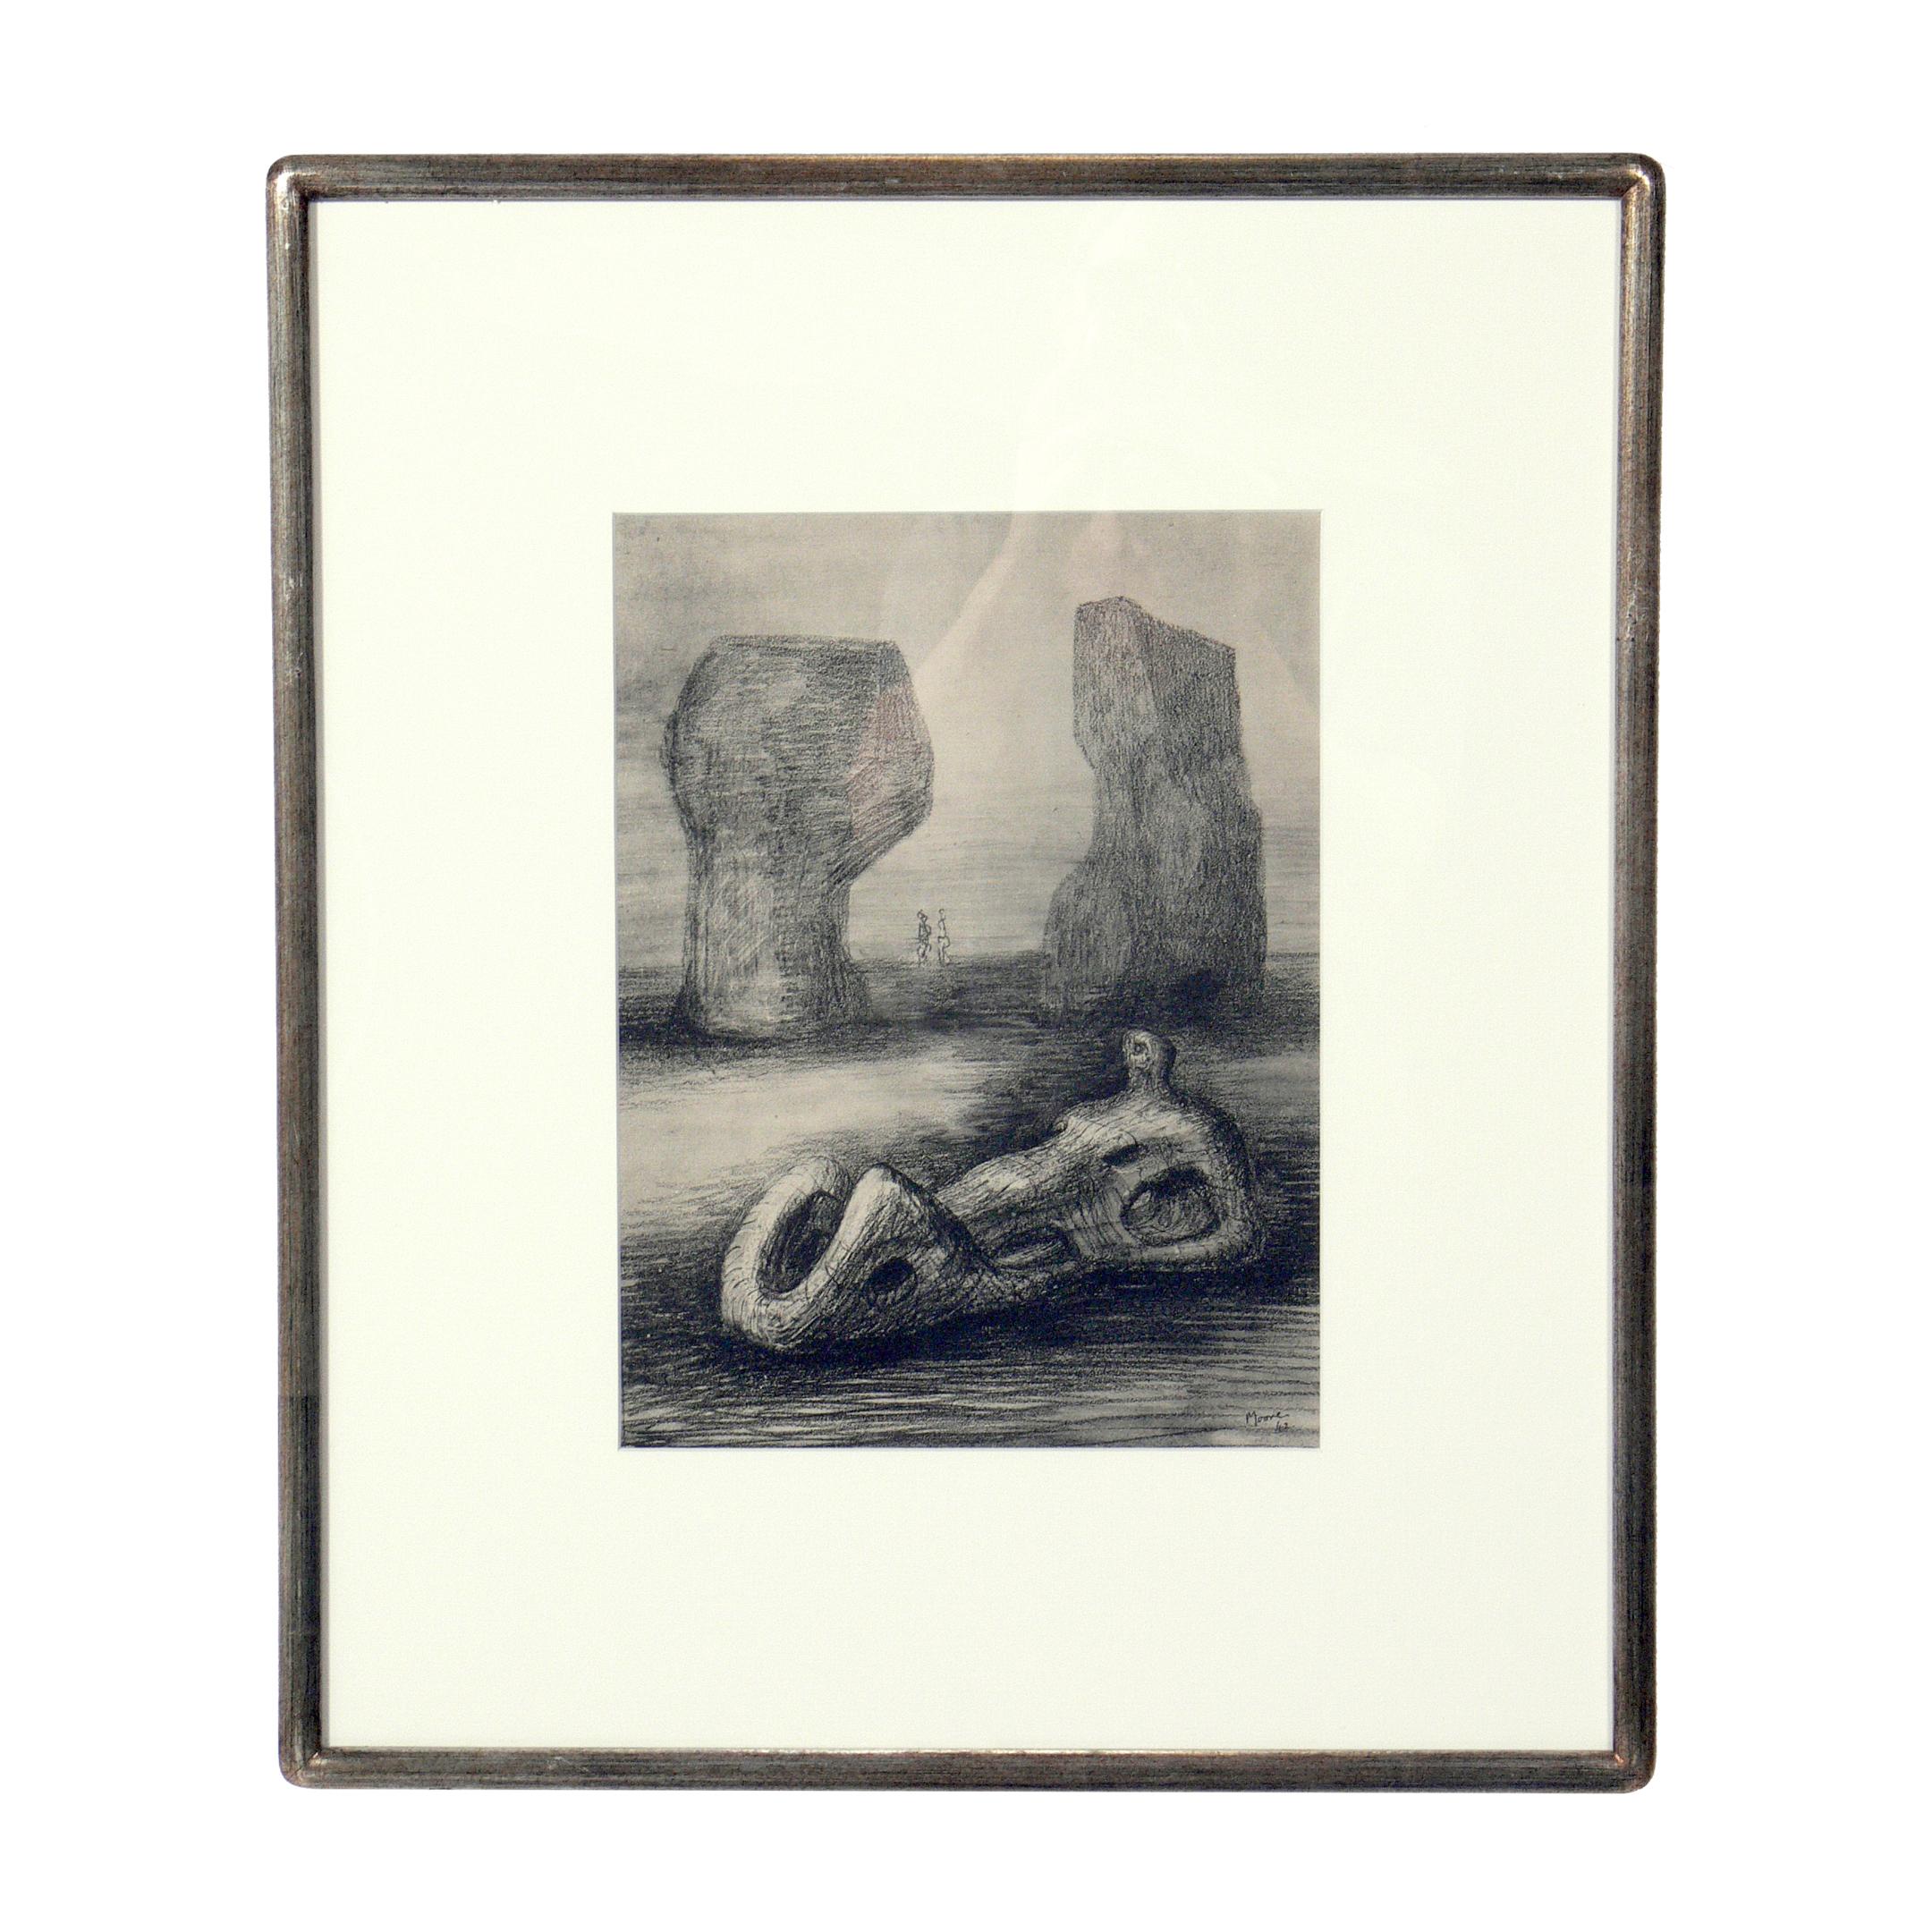 Henry Moore prints, from the limited edition folio entitled 